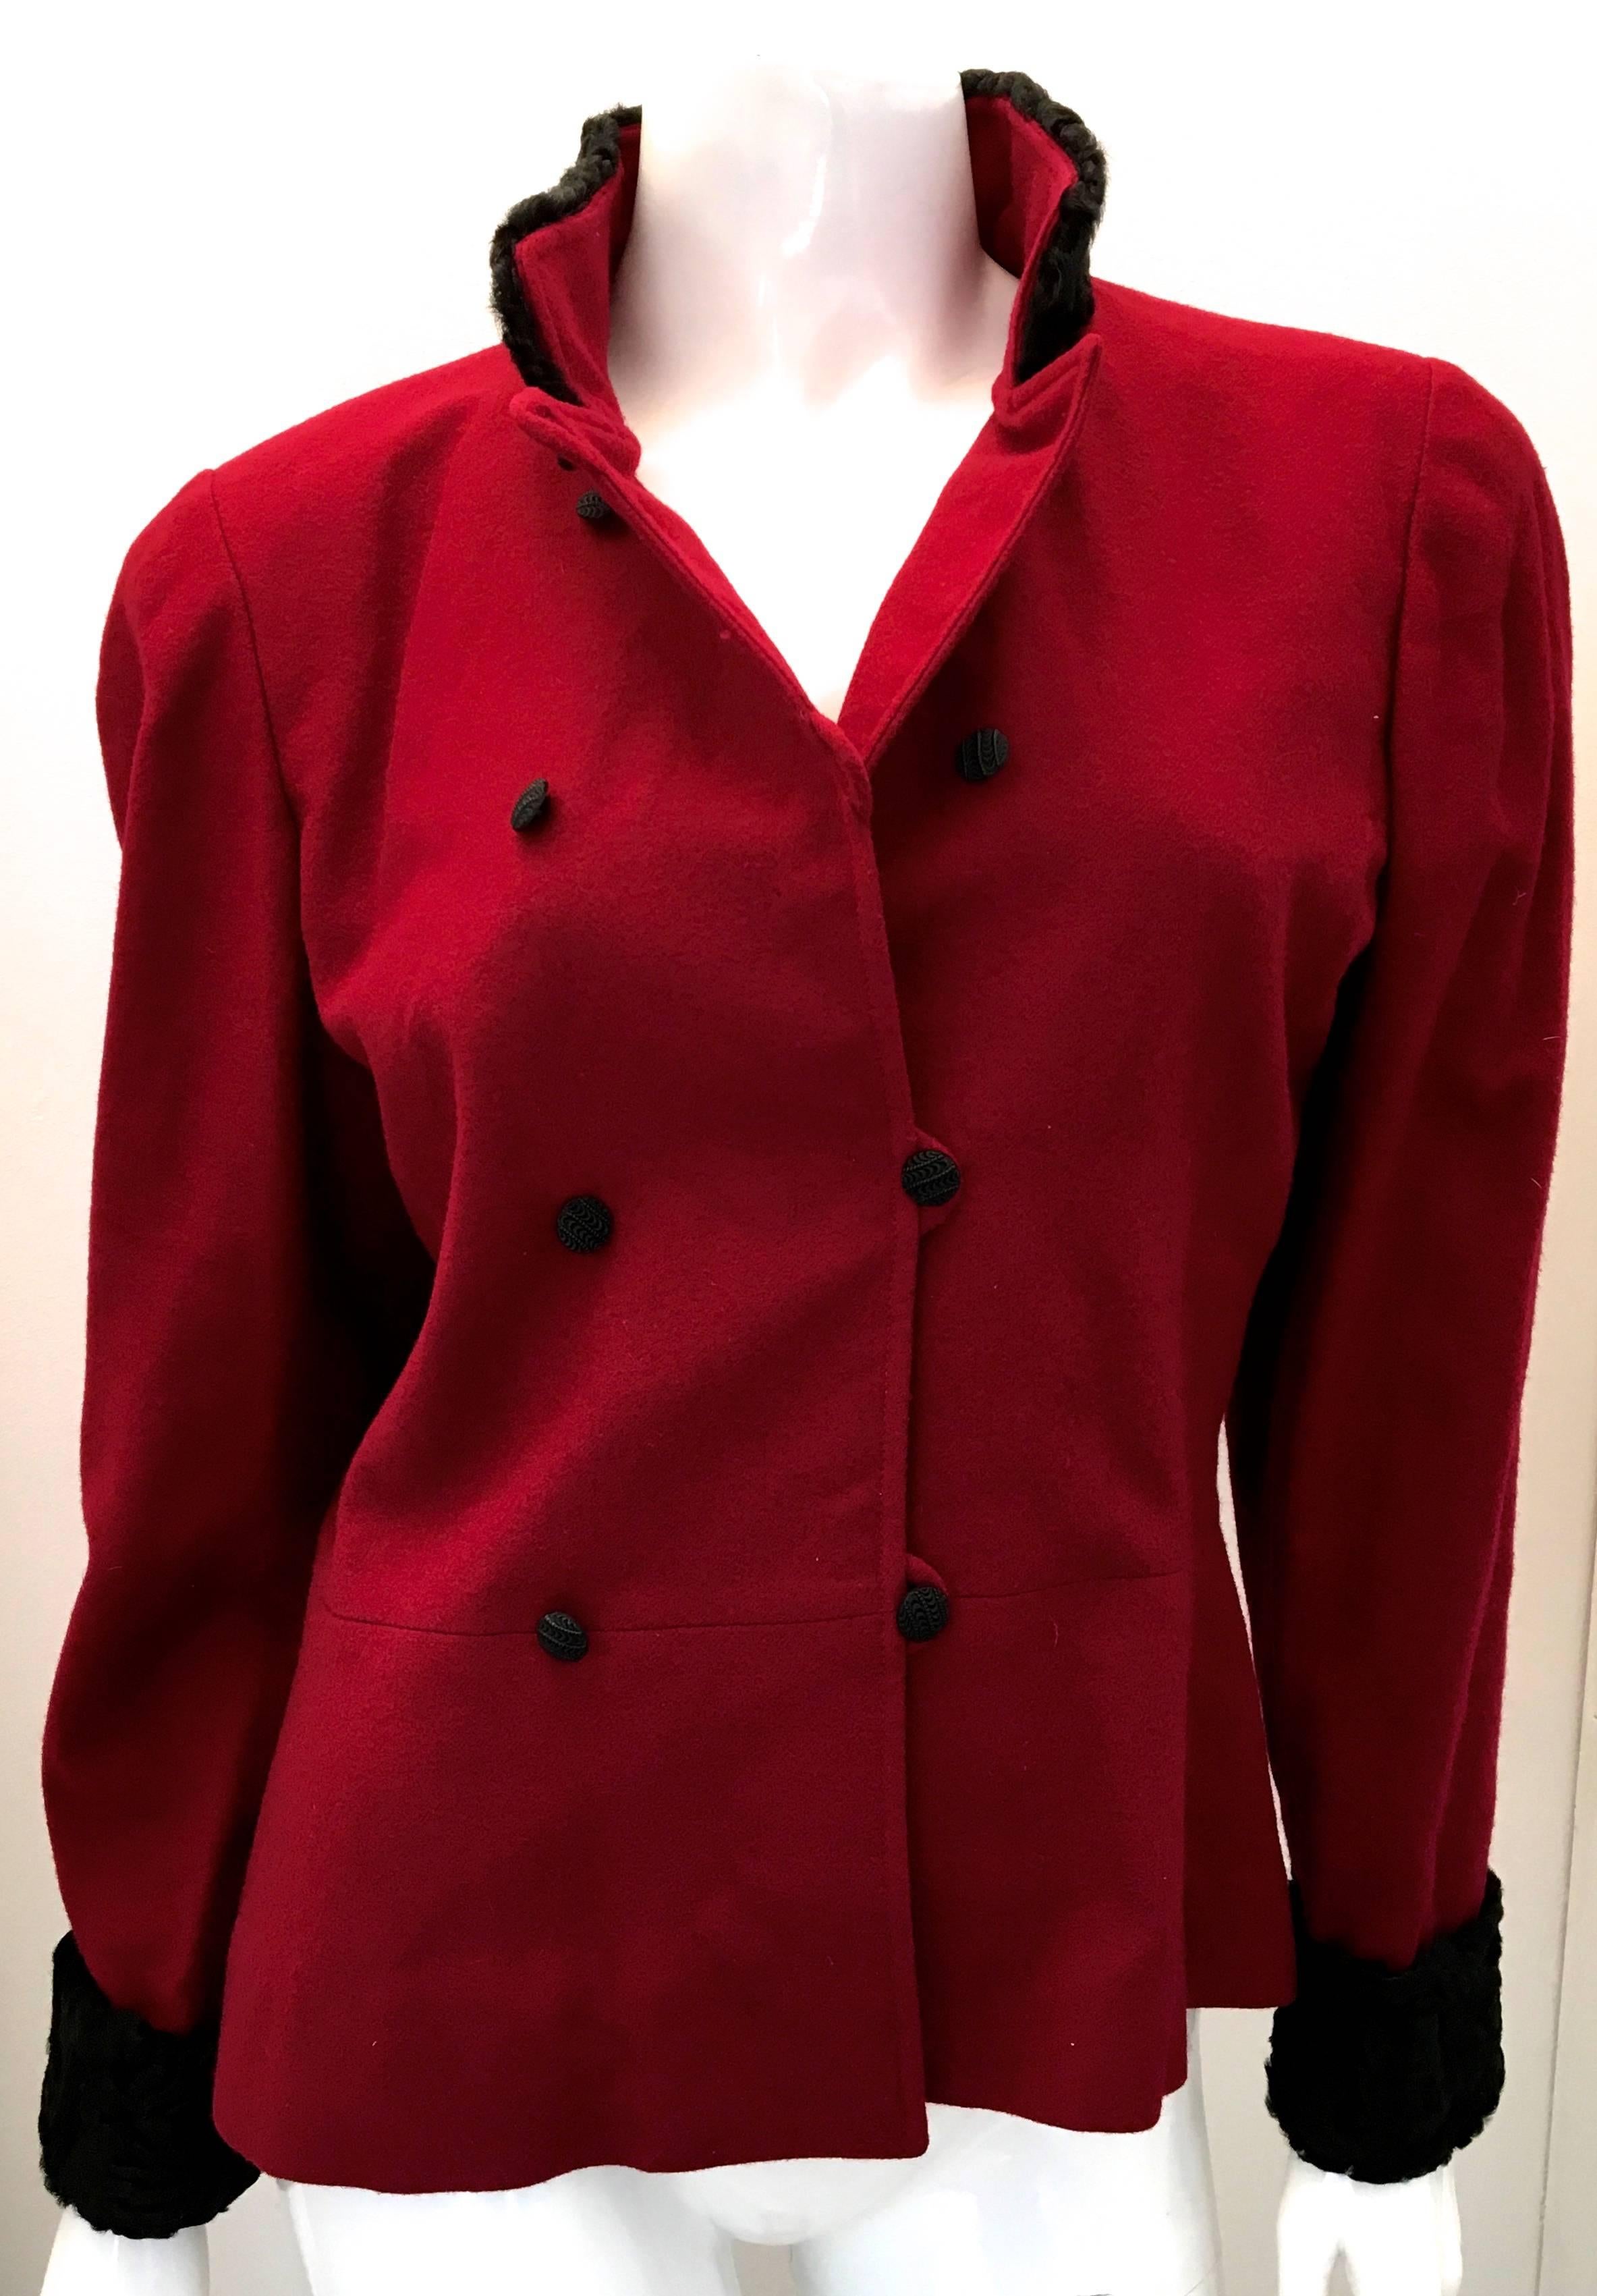 Vintage Burgundy Wool Jacket with Black Persian Lamb Cuffs and Collar In Good Condition For Sale In Boca Raton, FL